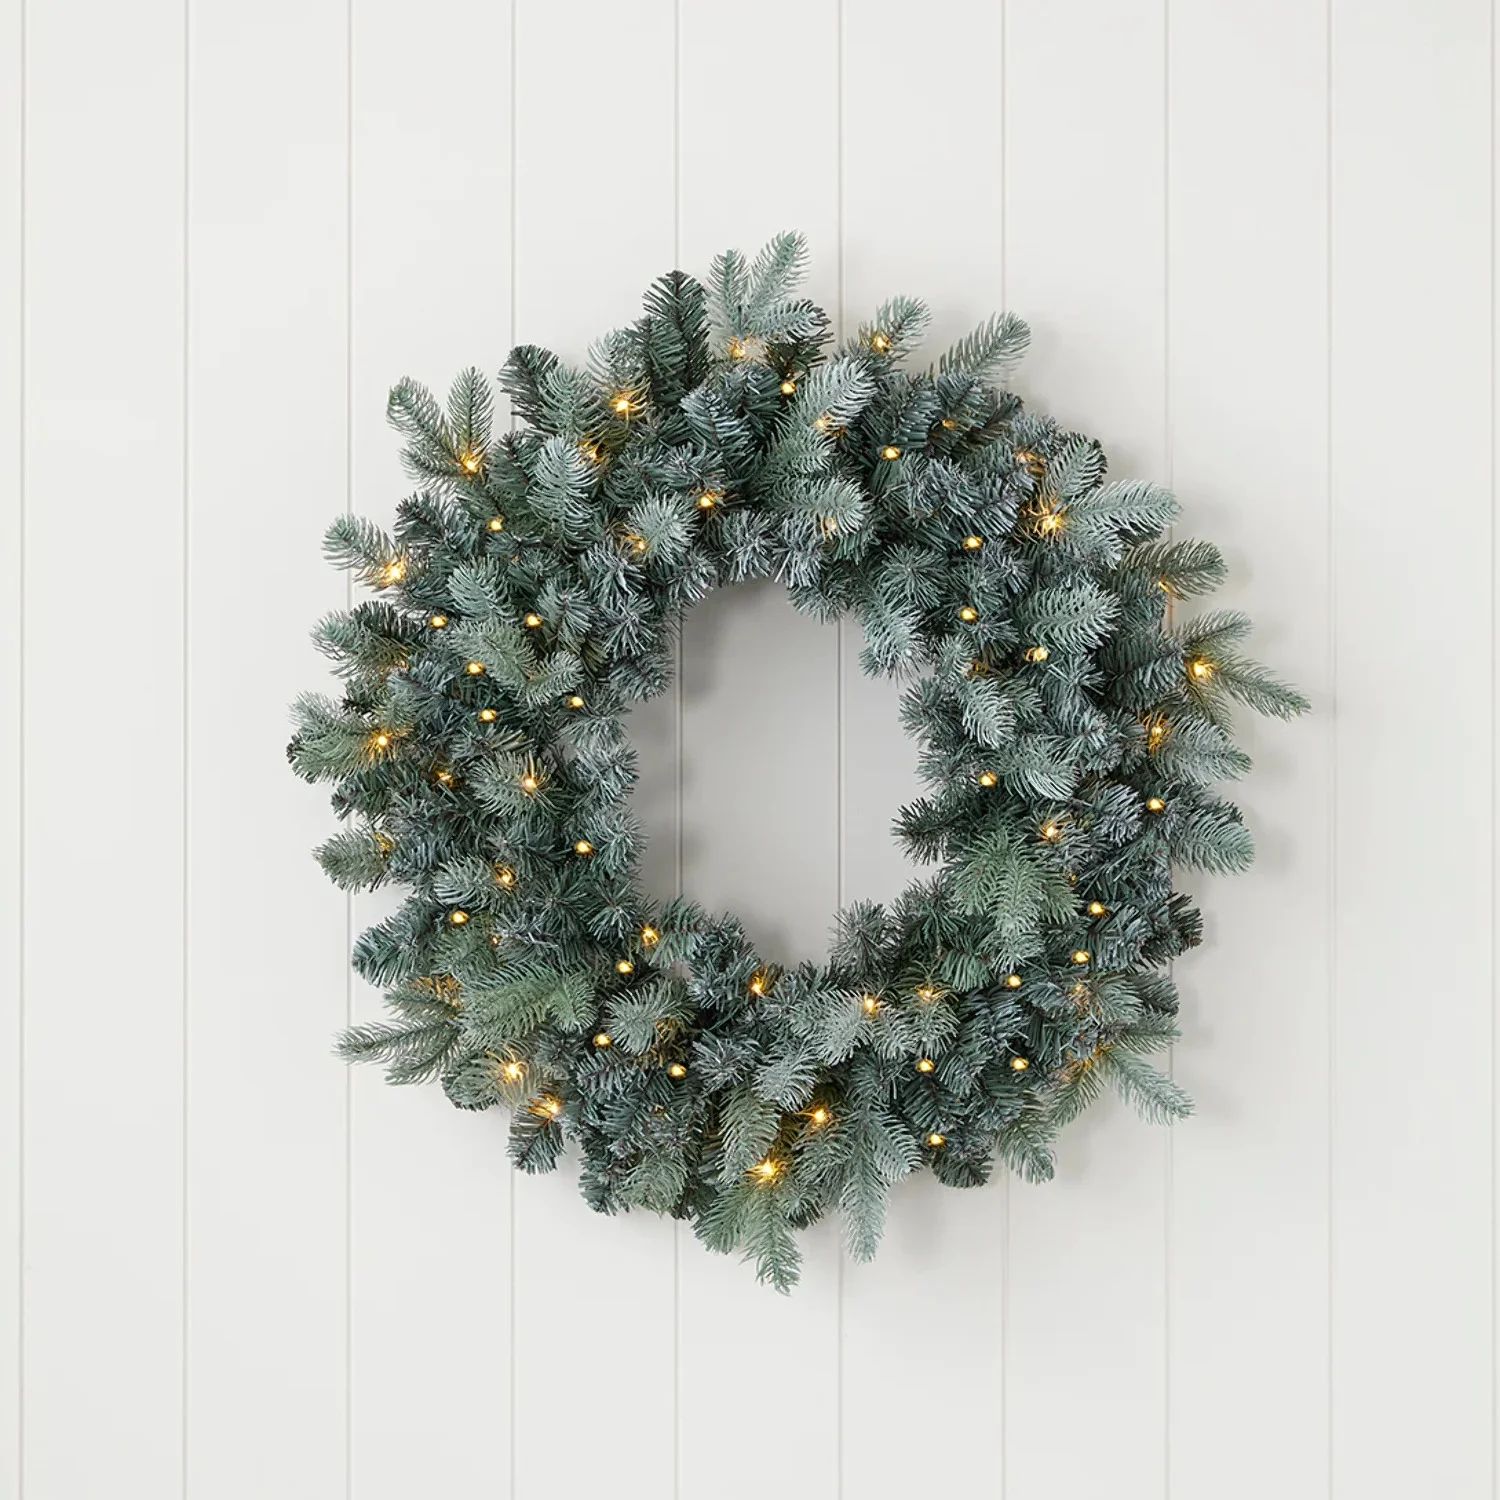 Blue Spruce 24" Wreath Pre-Lit with 50 Warm White LED Christmas Lights and Battery-Operated - by ... | Walmart (US)